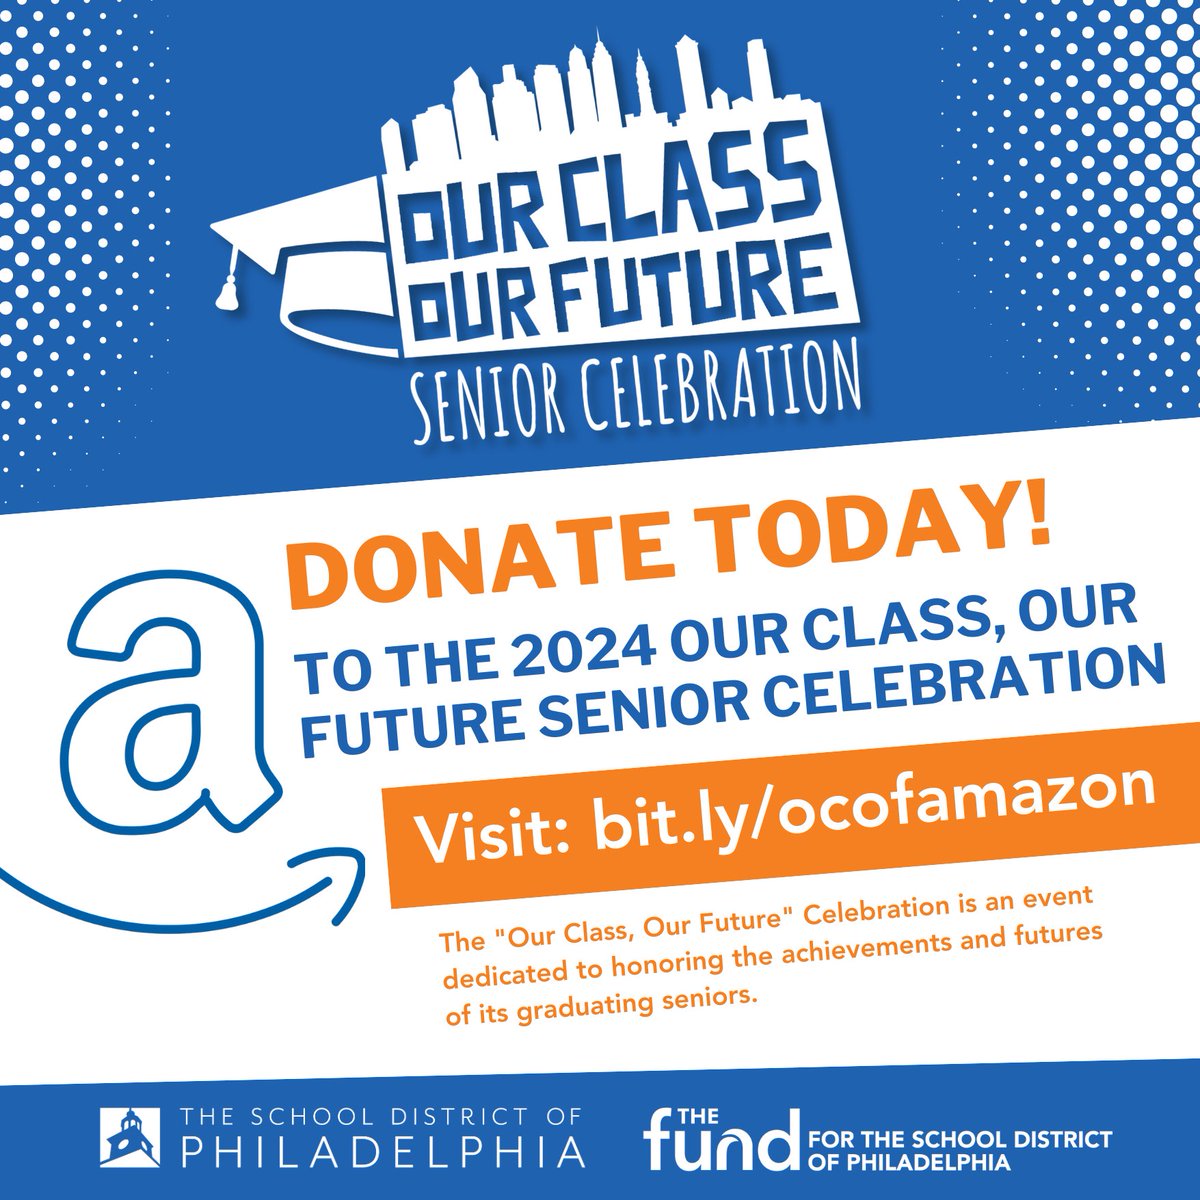 Let's make our senior celebration unforgettable! Explore the Our Class Our Future Amazon wishlist and be a part of creating lasting memories. Visit bit.ly/ocofamazon to contribute today! 🎉🎓